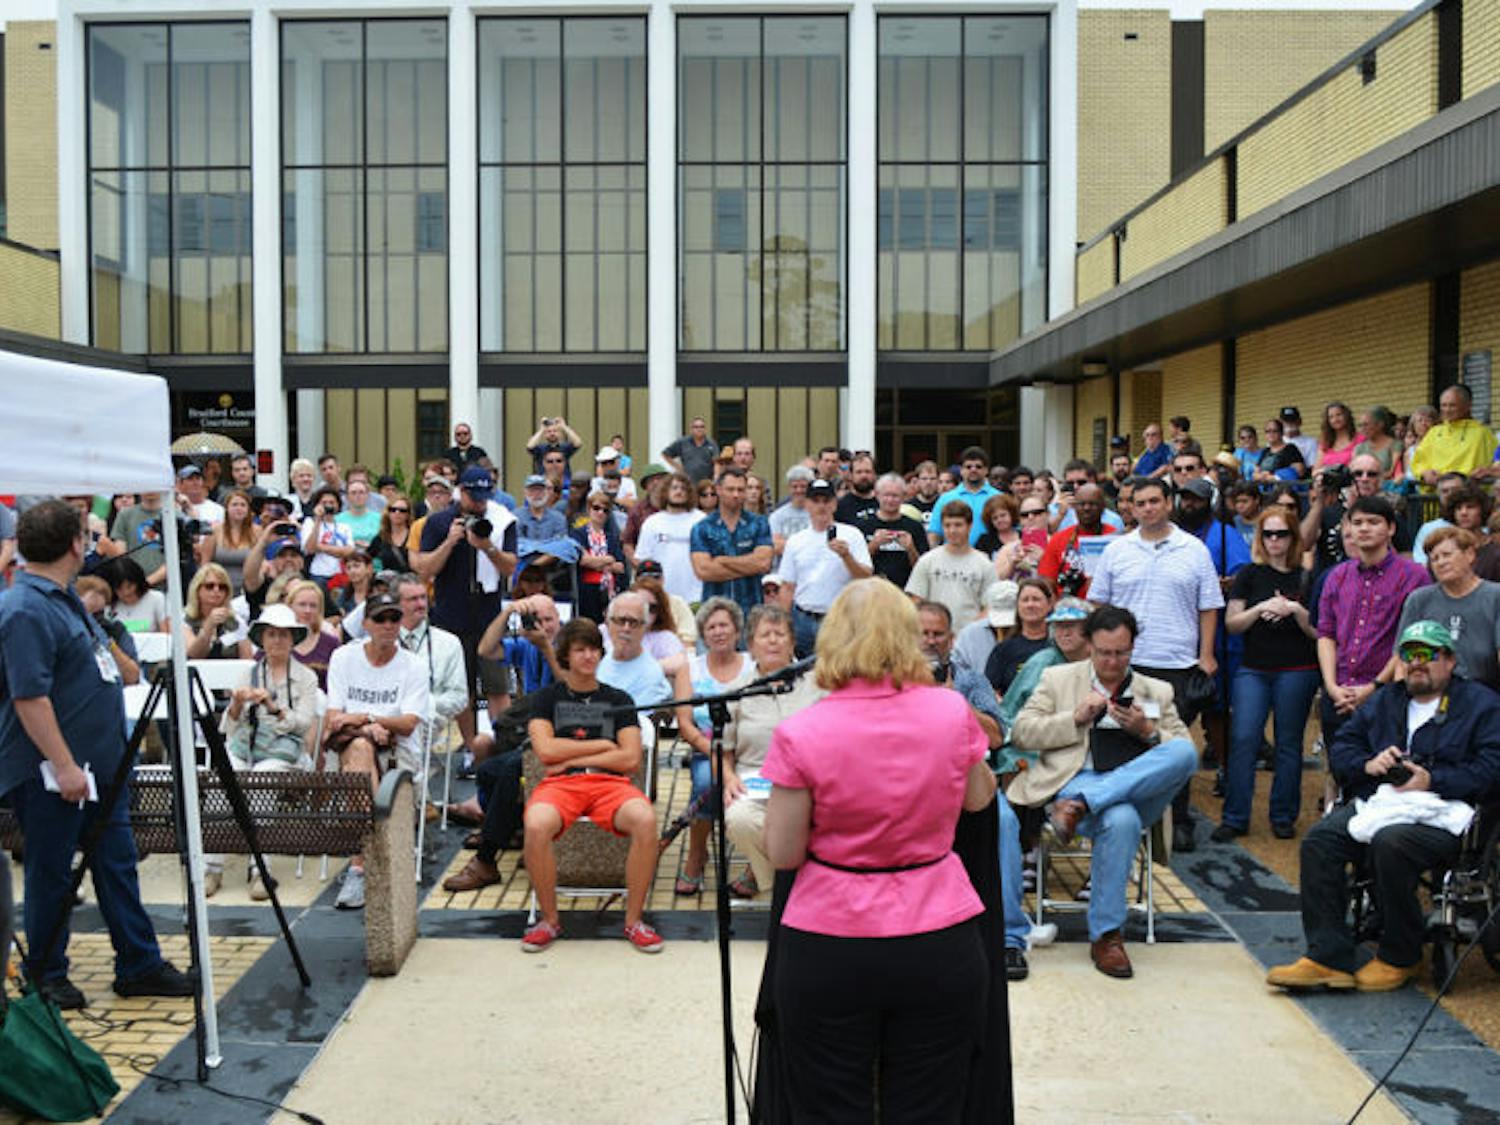 Jeanette Madea, Ph. D., coordinator for Center for Inquiry in Fort Lauderdale, speaks to a crowd during the unveiling of an atheist monument outside the Bradford County Courthouse on Saturday, June 29, 2013 in Starke, Fla.